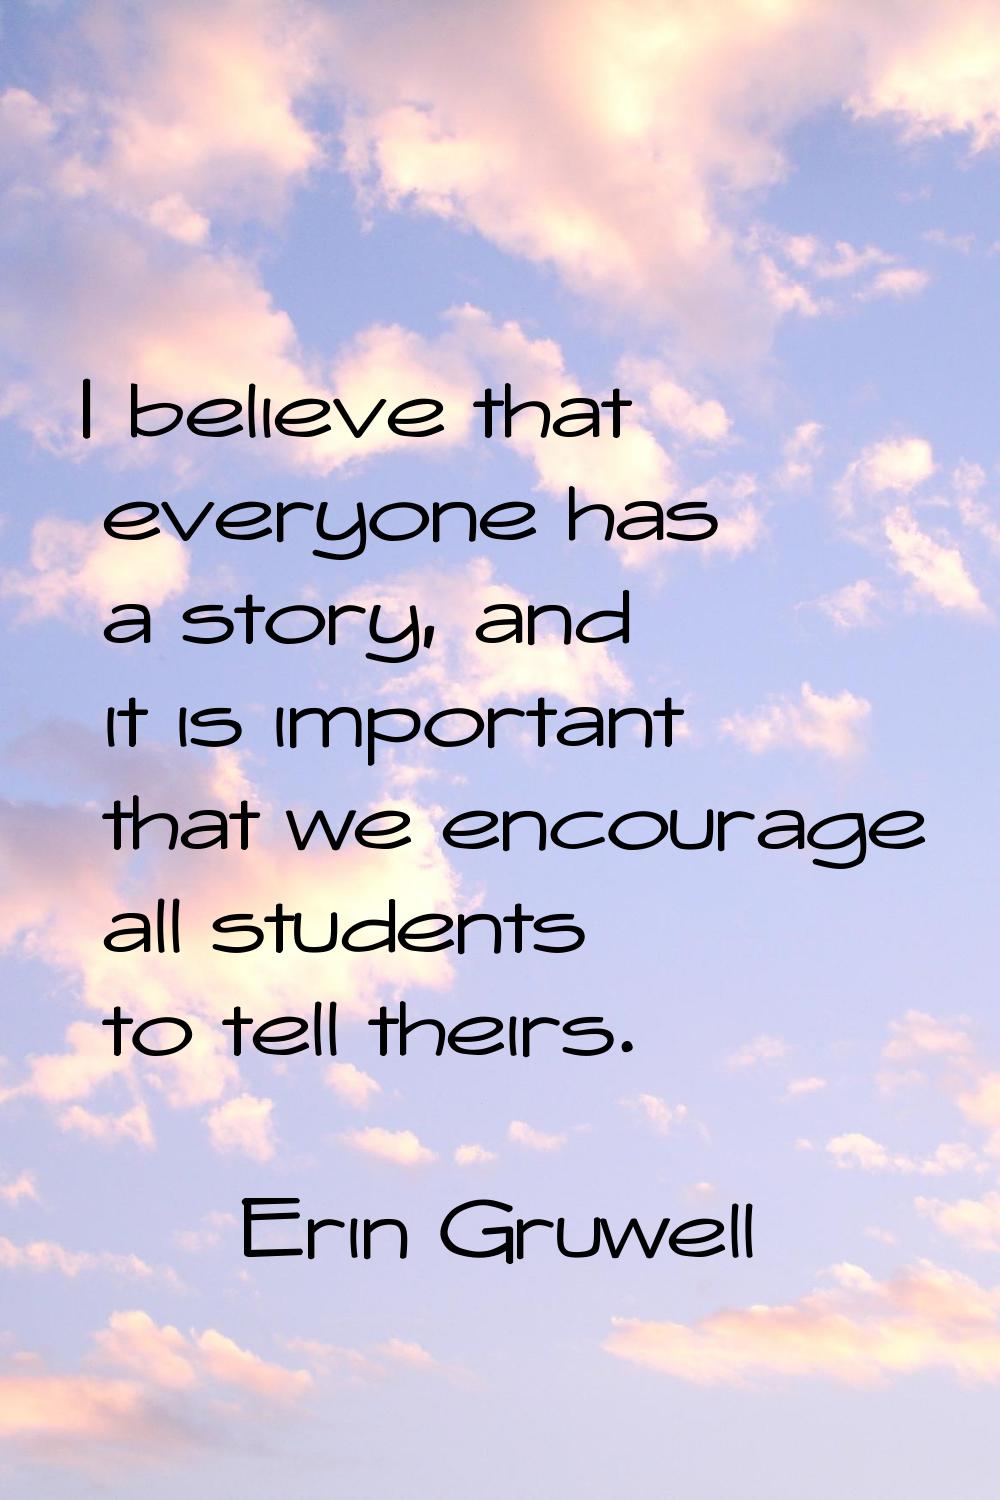 I believe that everyone has a story, and it is important that we encourage all students to tell the